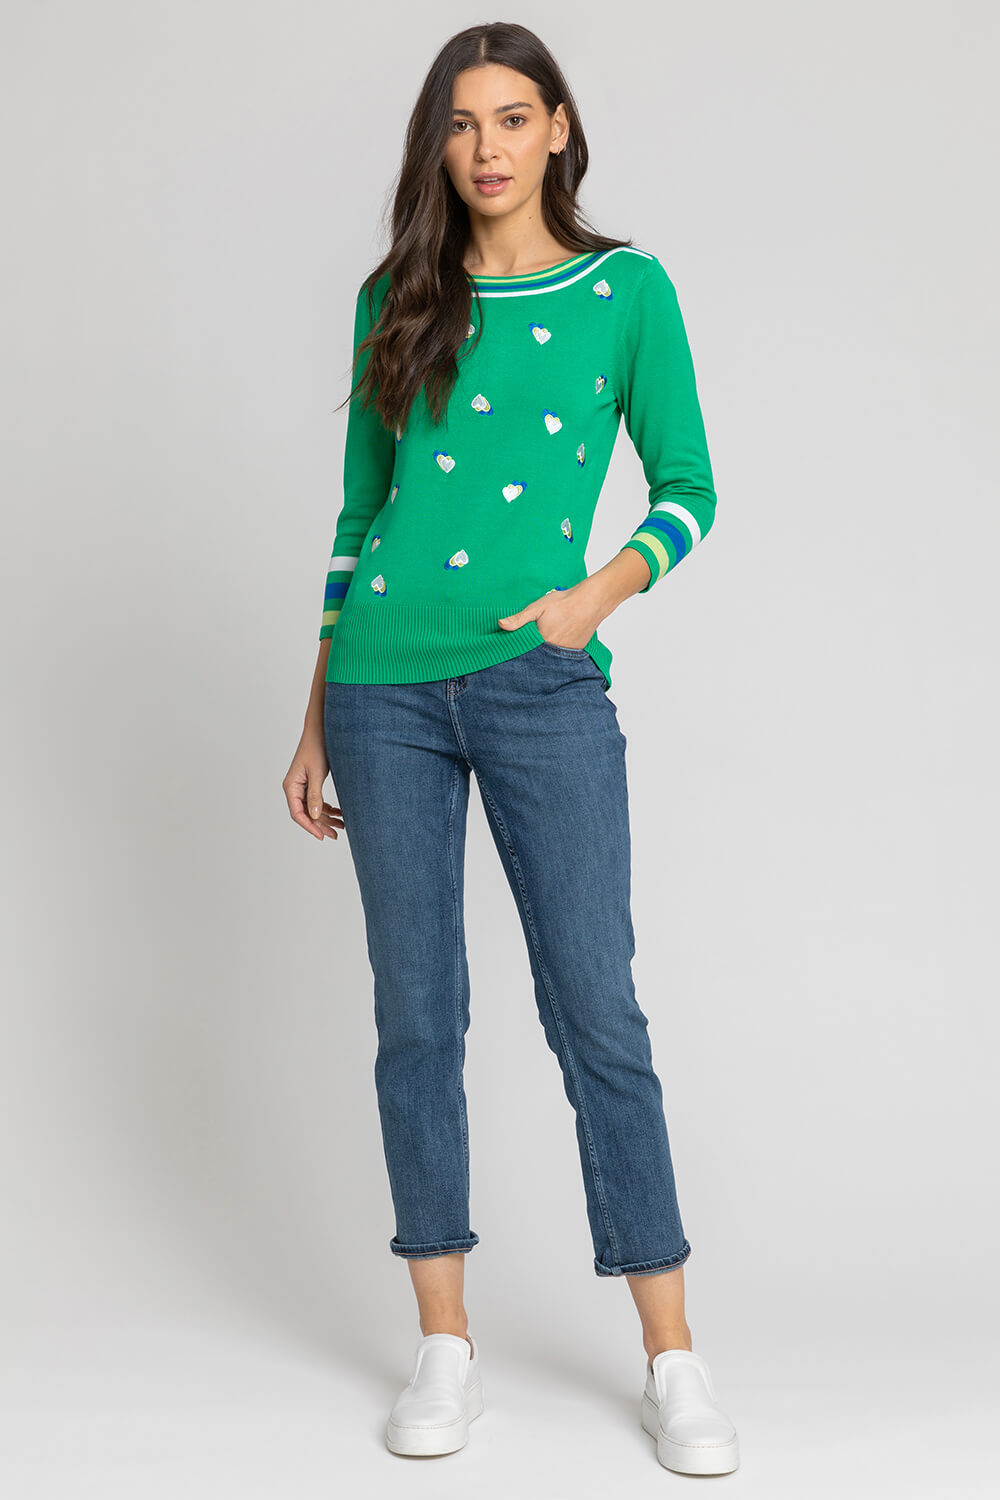 Emerald Heart Embroidered Stripe Print Jumper, Image 3 of 5